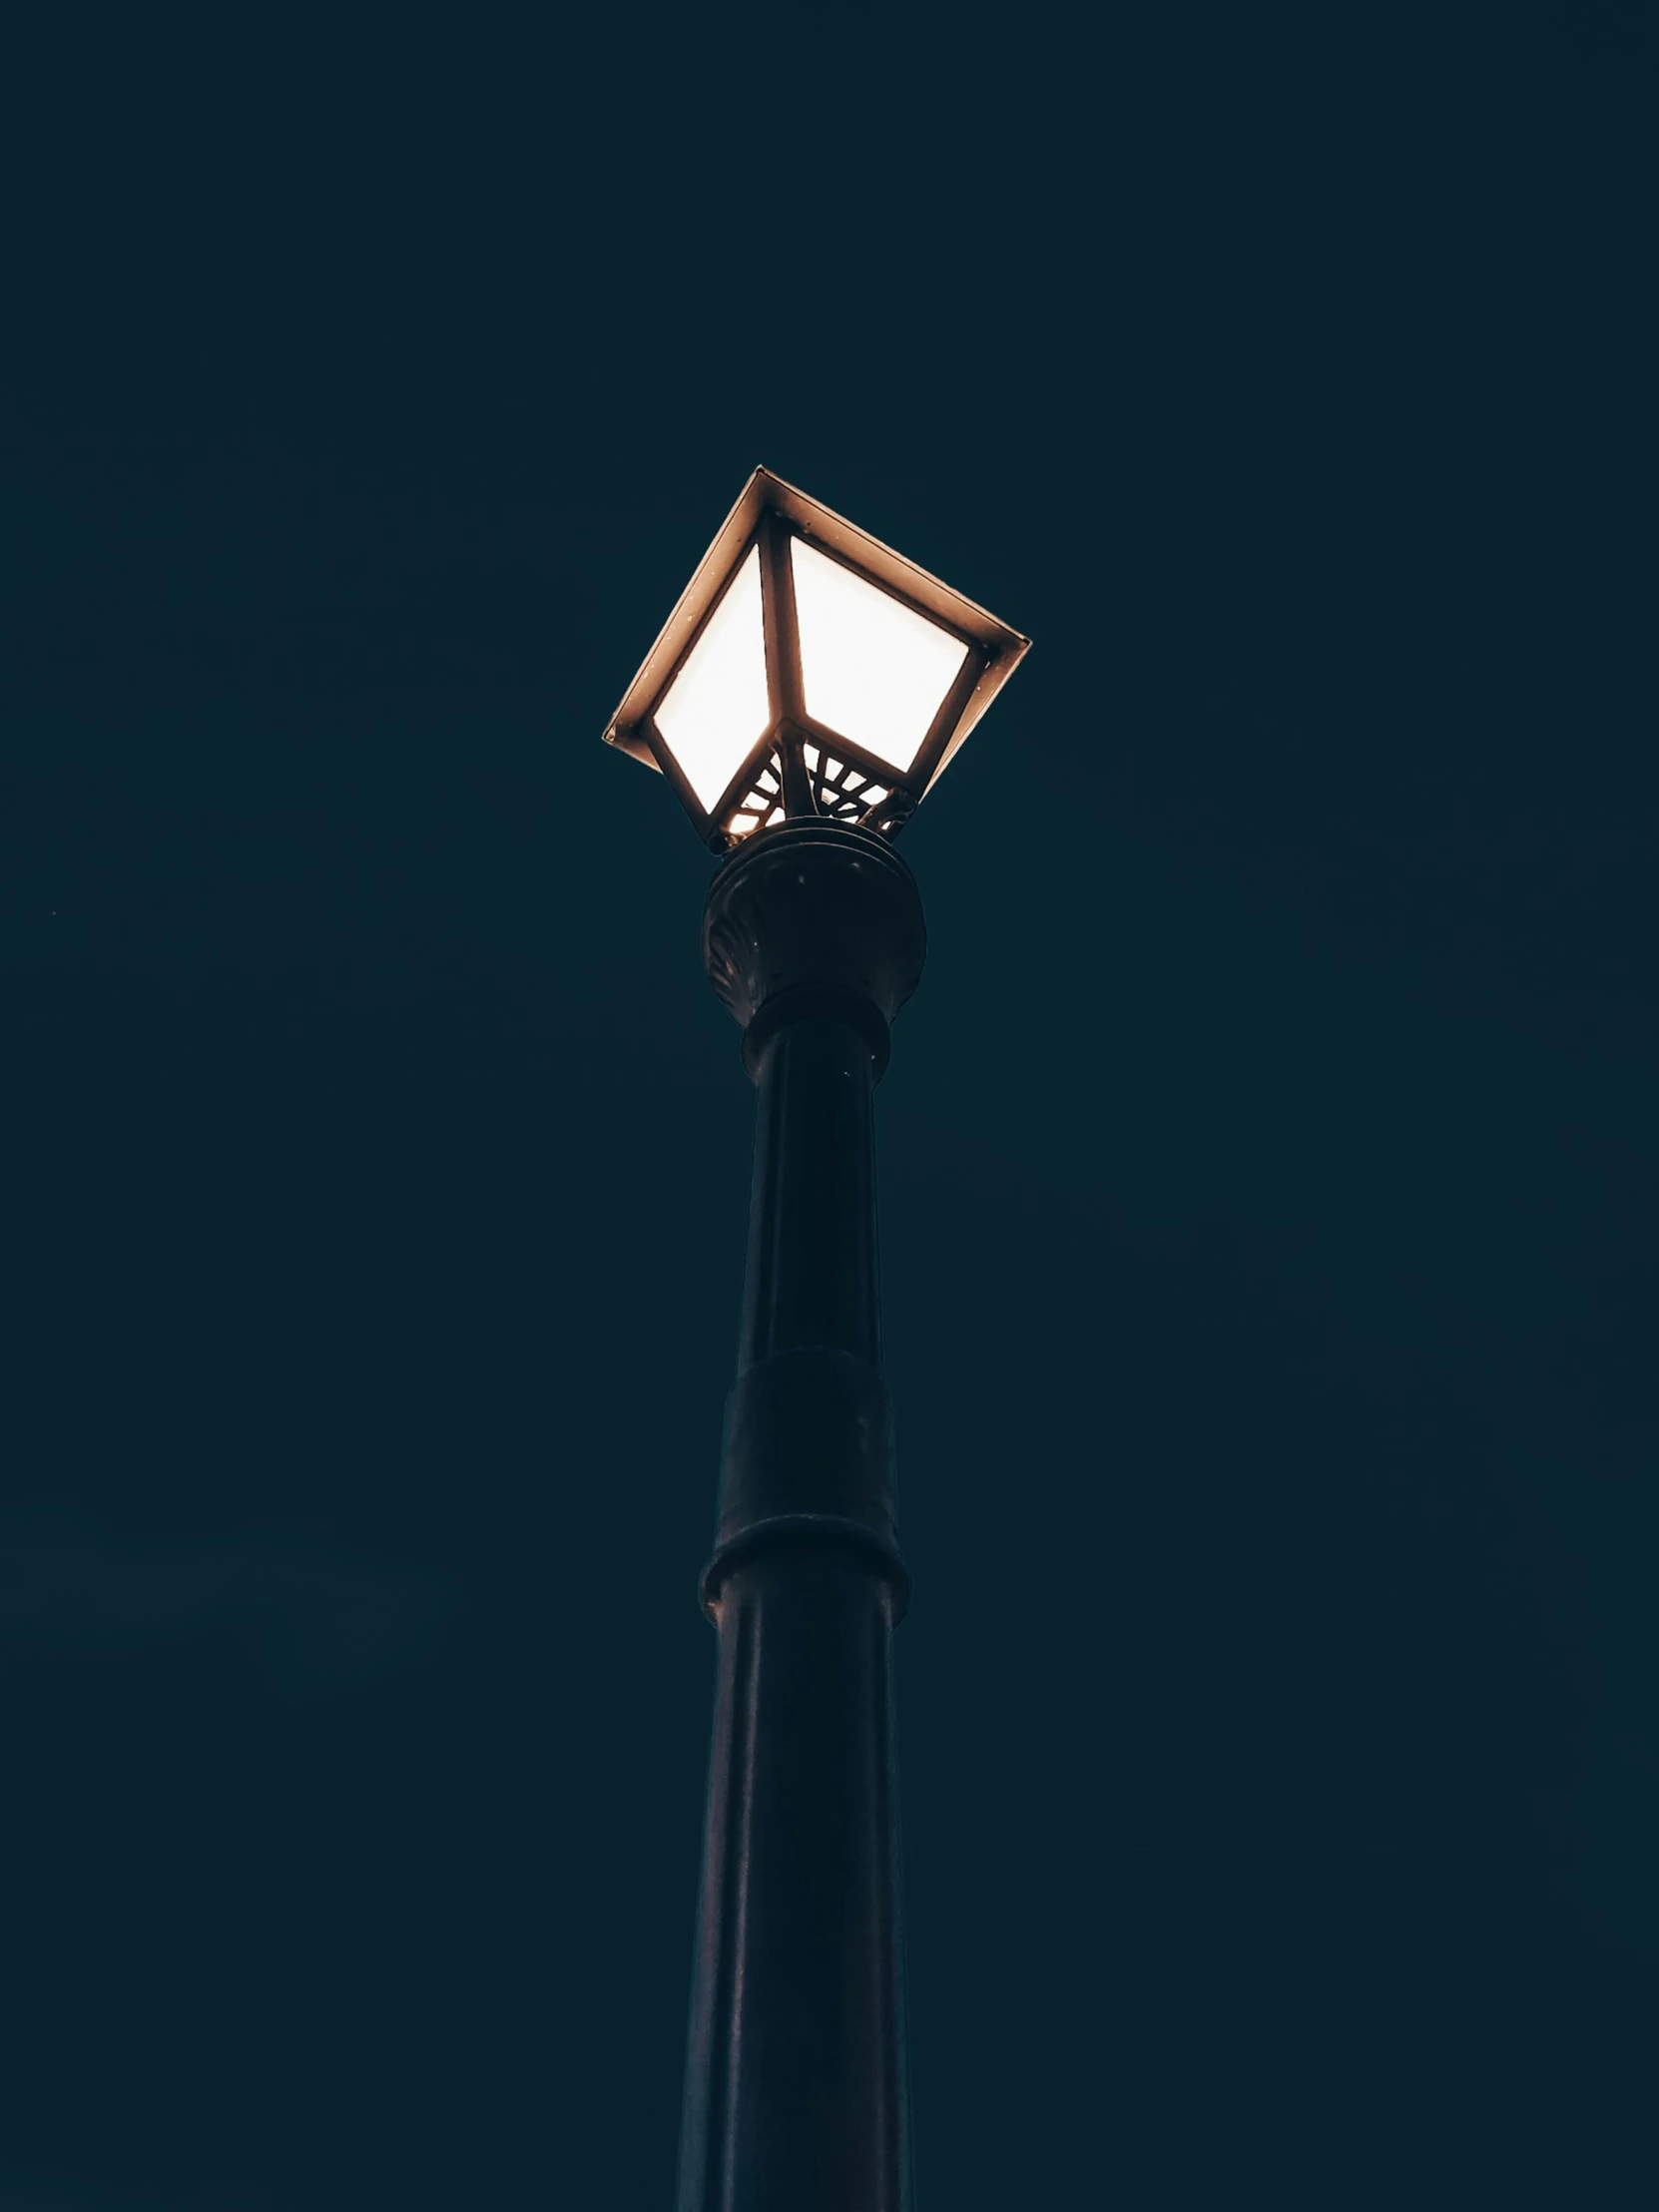 a lit street light on the side of a building